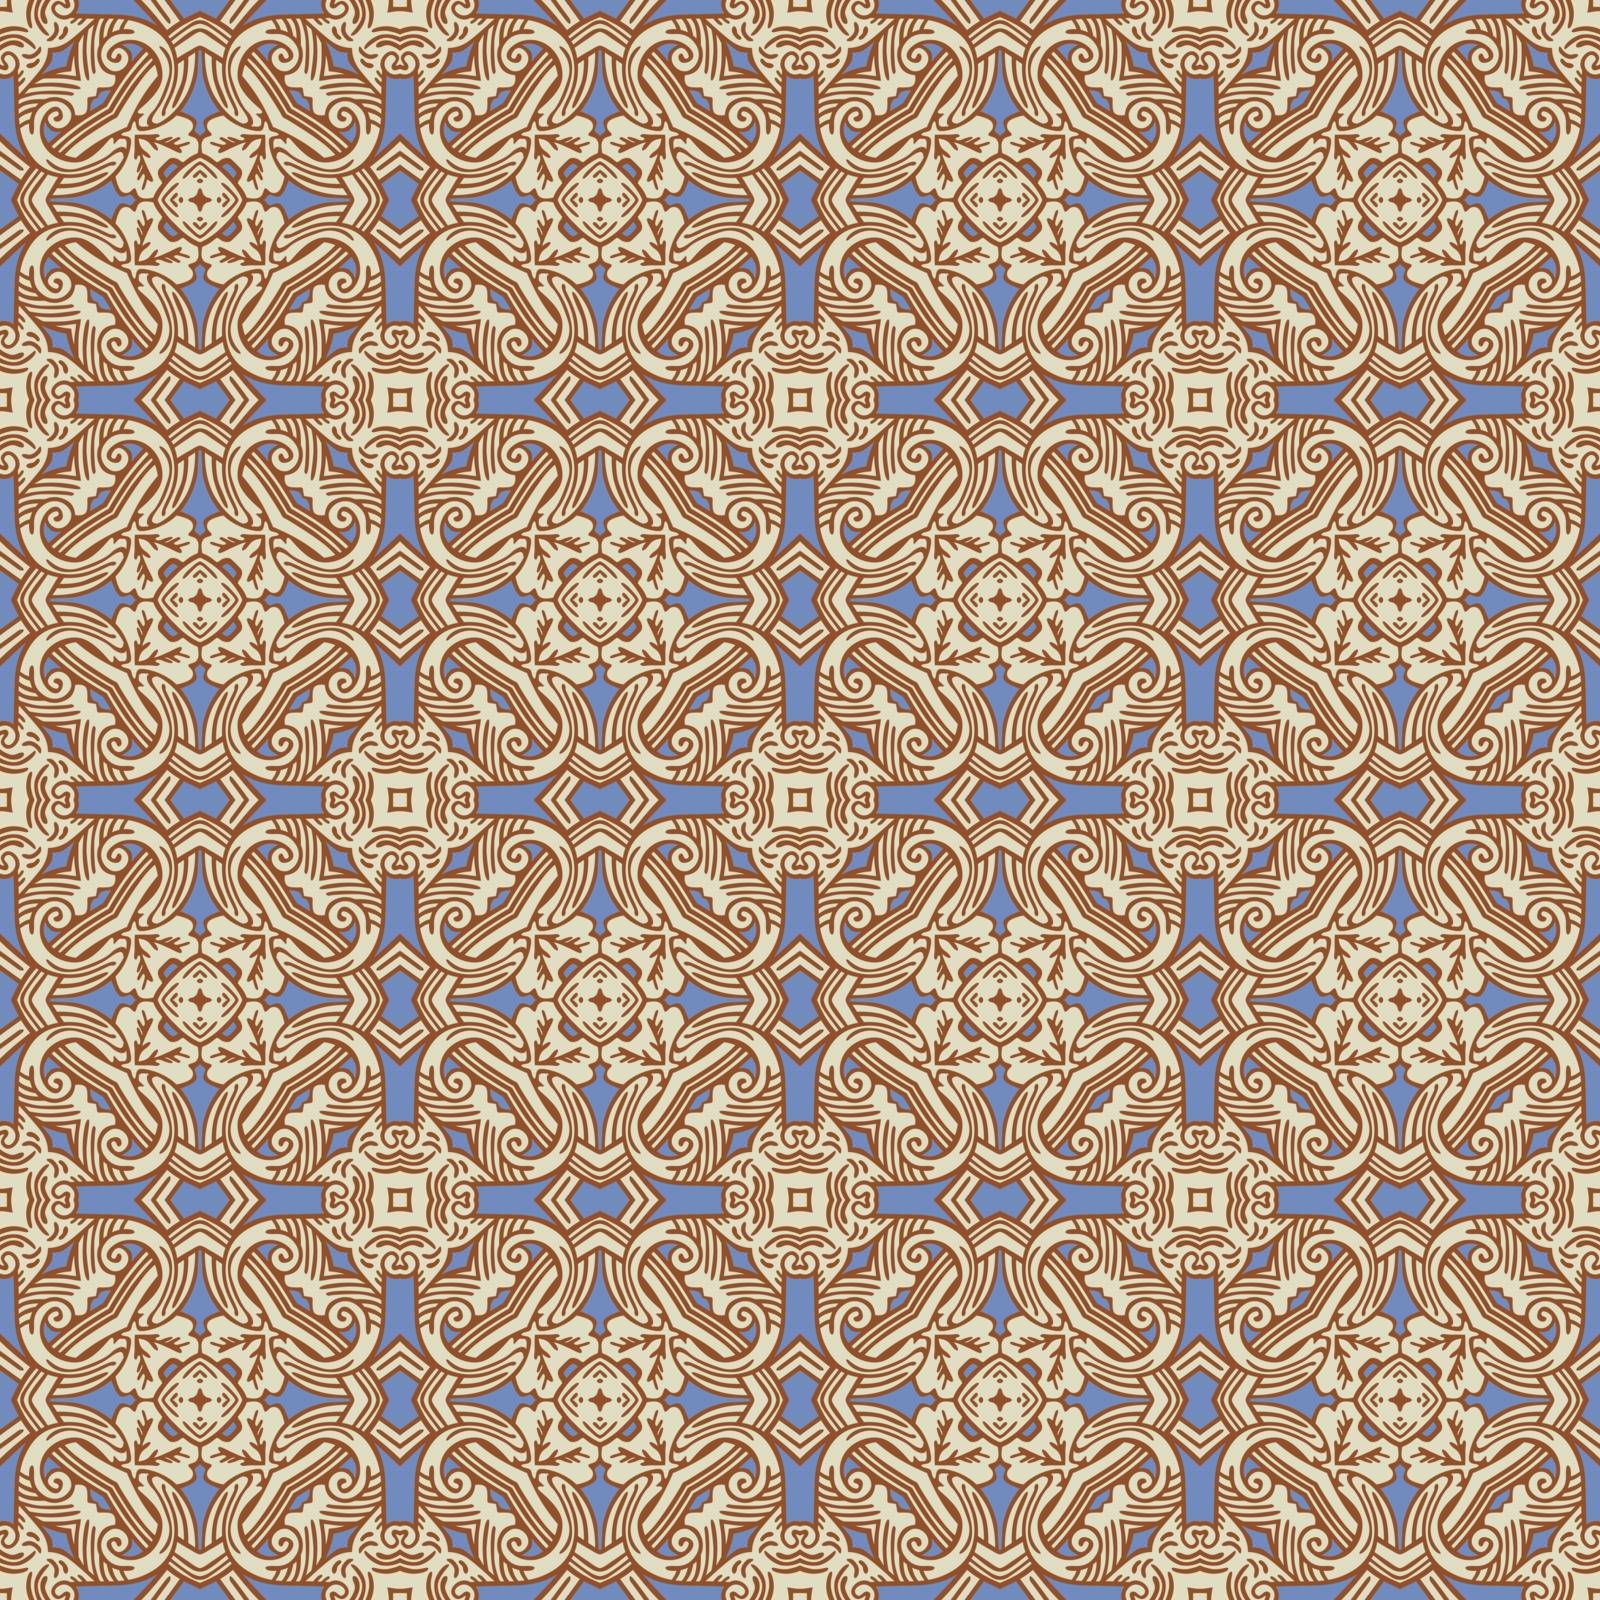 Seamless illustrated pattern made of abstract elements in beige, dark red and blue